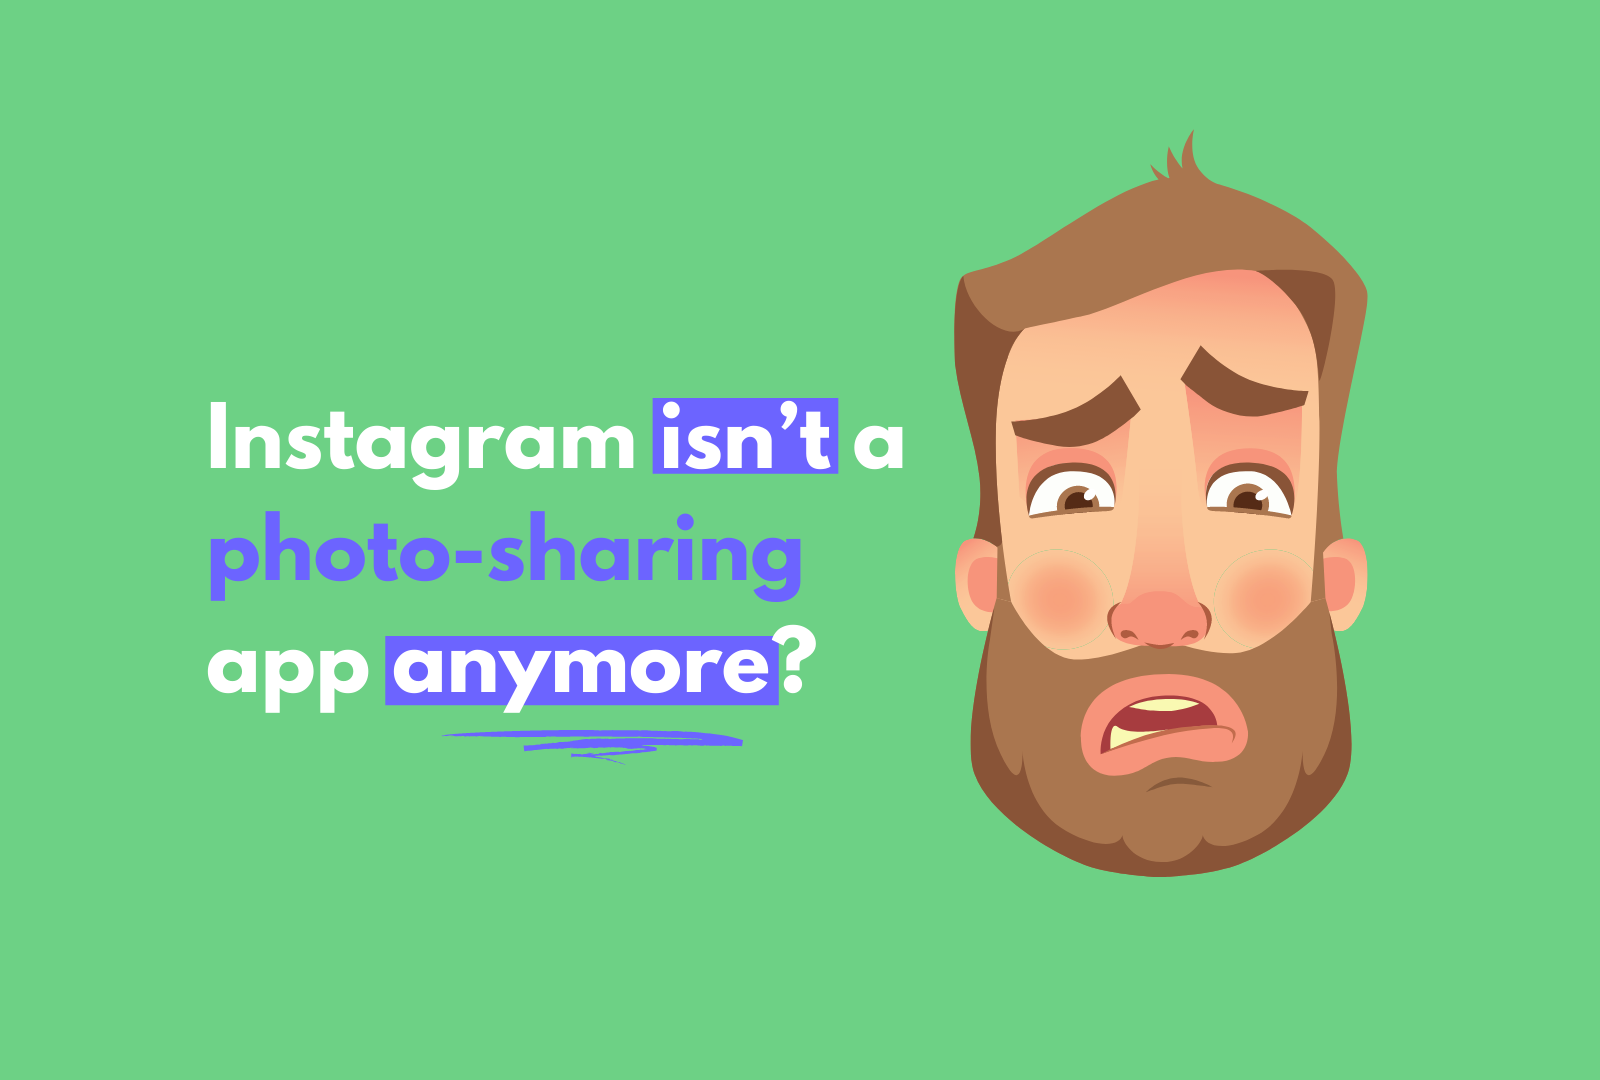 Instagram isn’t a photo-sharing app anymore?